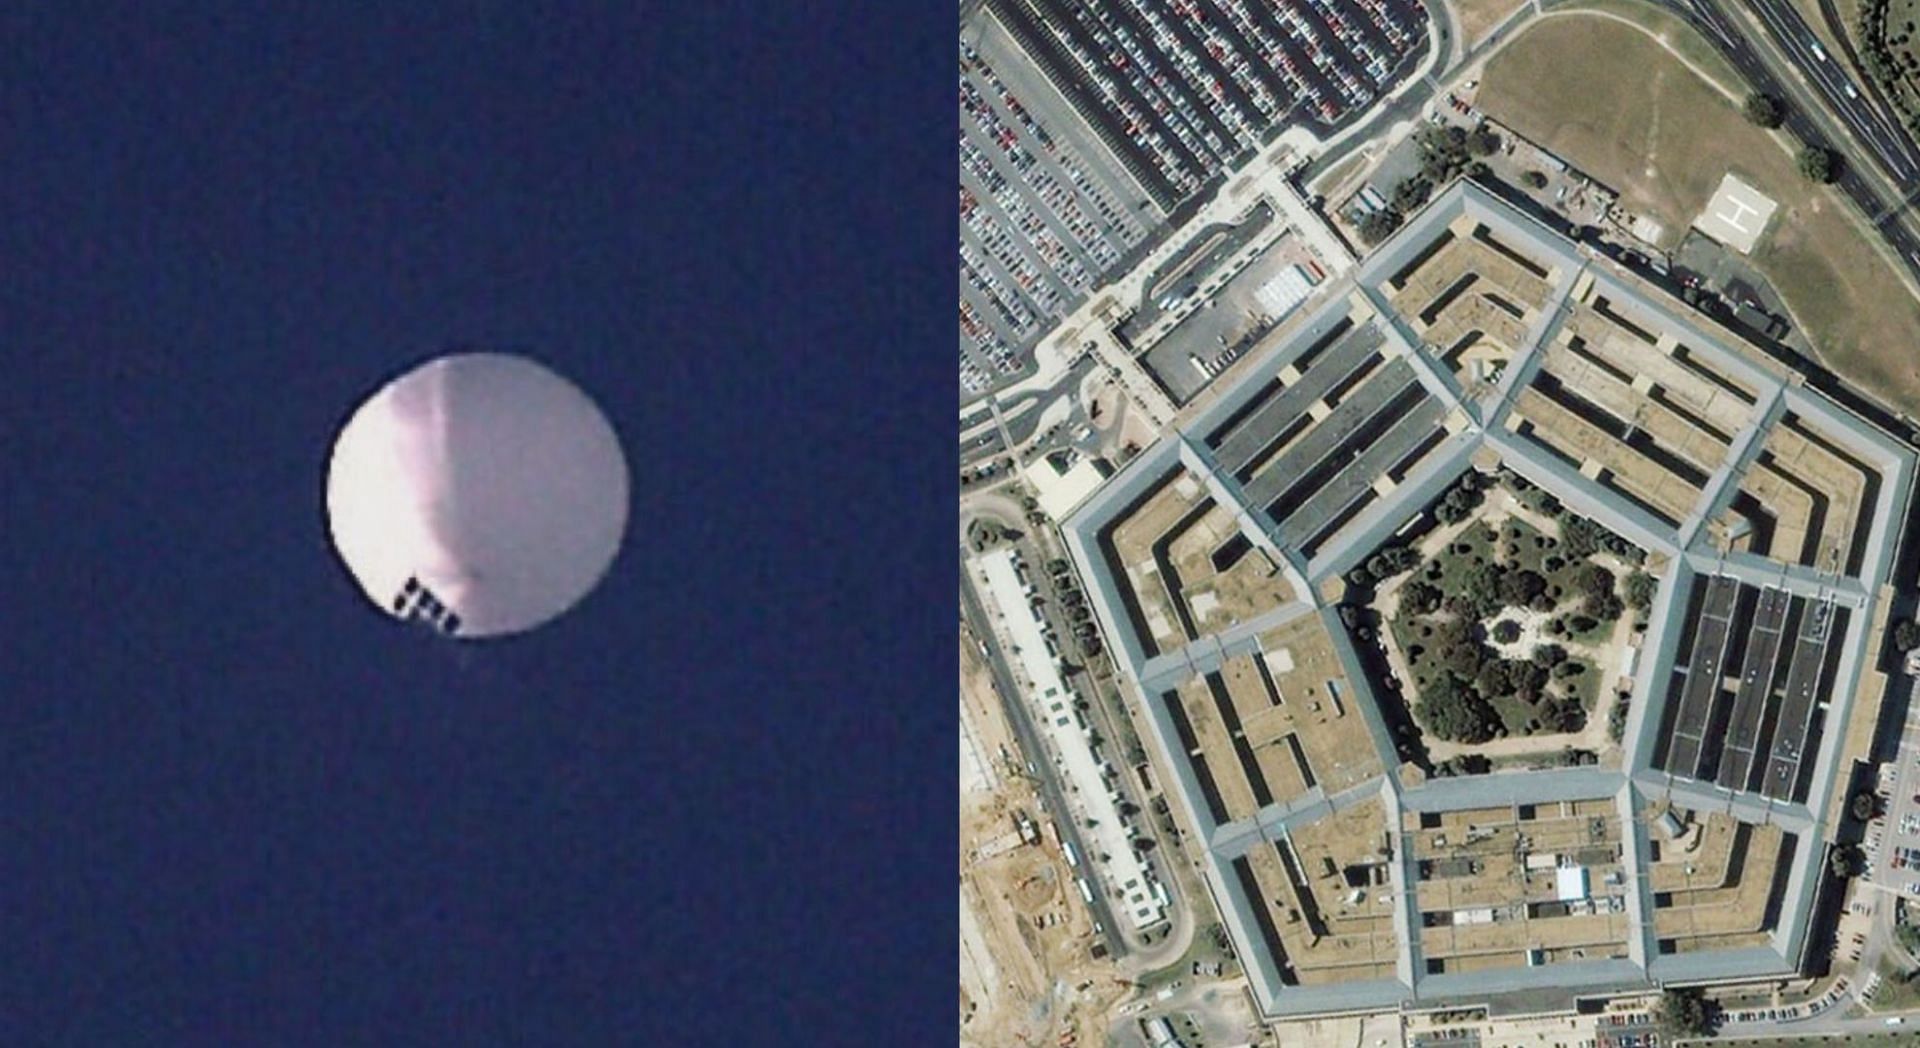 The U.S. Pentagon allegedly tracked a Chinese spy balloon over the northern U.S. States (Image via Alejandor Alvarez/Twitter and Getty Images)